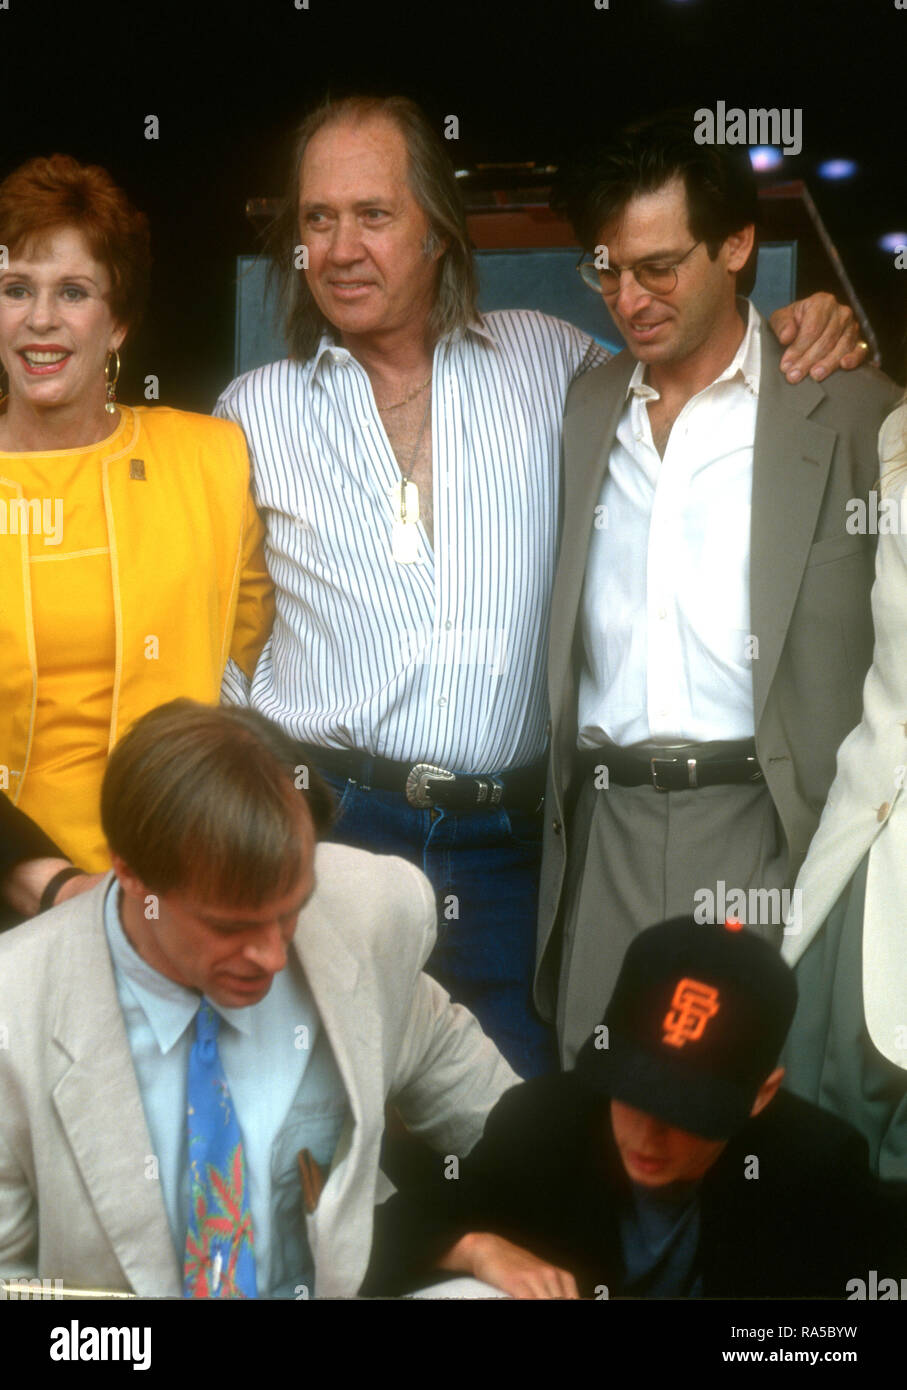 HOLLYWOOD, CA - JULY 15: Actress Carol Burnett, actor David Carradine, actor Robert Carradine, actor/honoree Keith Carradine and son Cade Carradine attend ceremony for his Star Ceremony on July 15, 1993 on Hollywood Walk of Fame in Hollywood, California. Photo by Barry King/Alamy Stock Photo Stock Photo